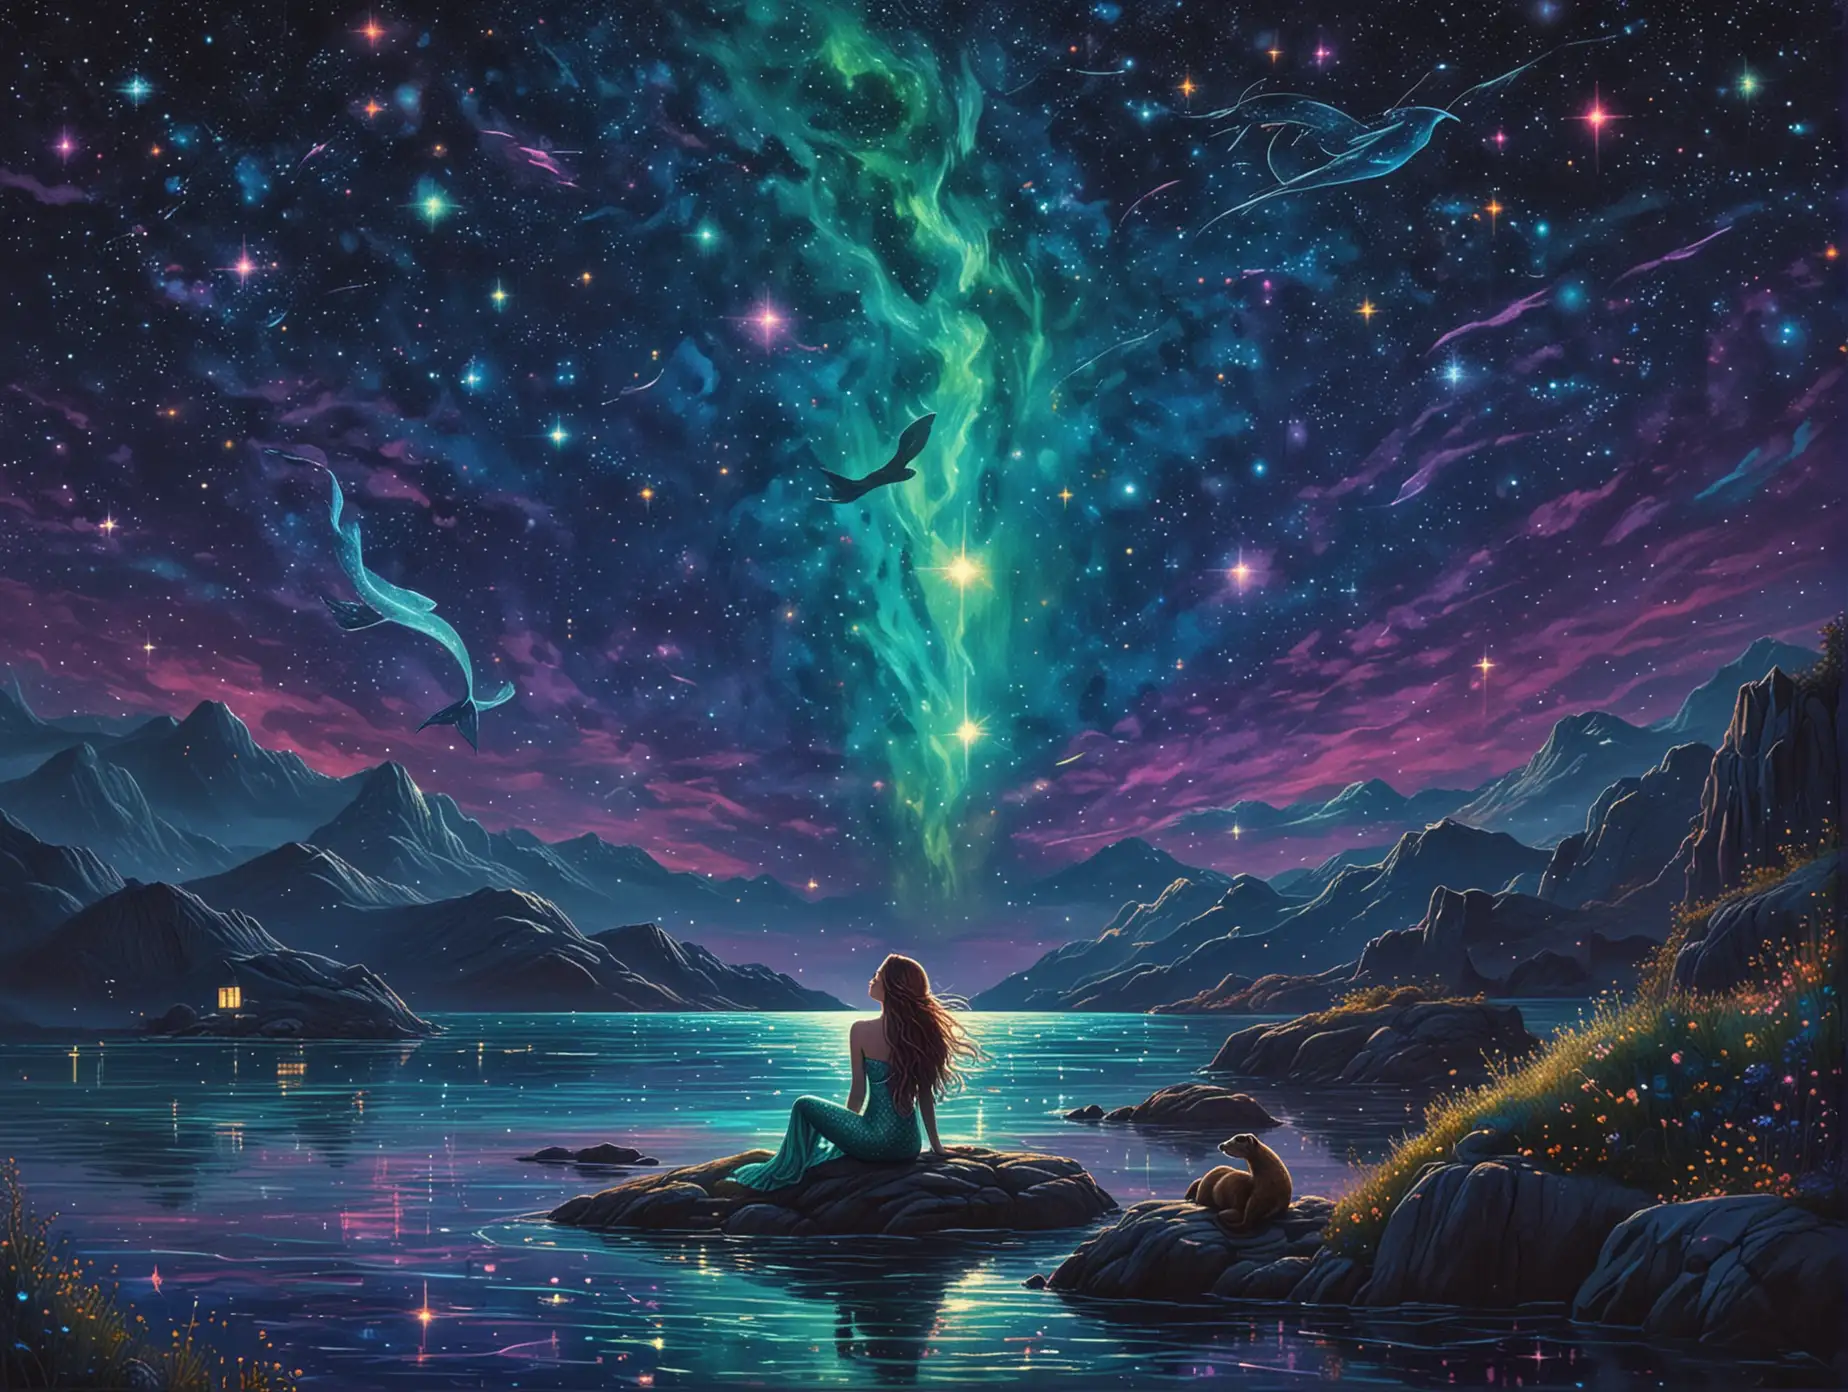 surreal starry night  and some constellations and neon colors, a mermaid wating the sky with her otter
